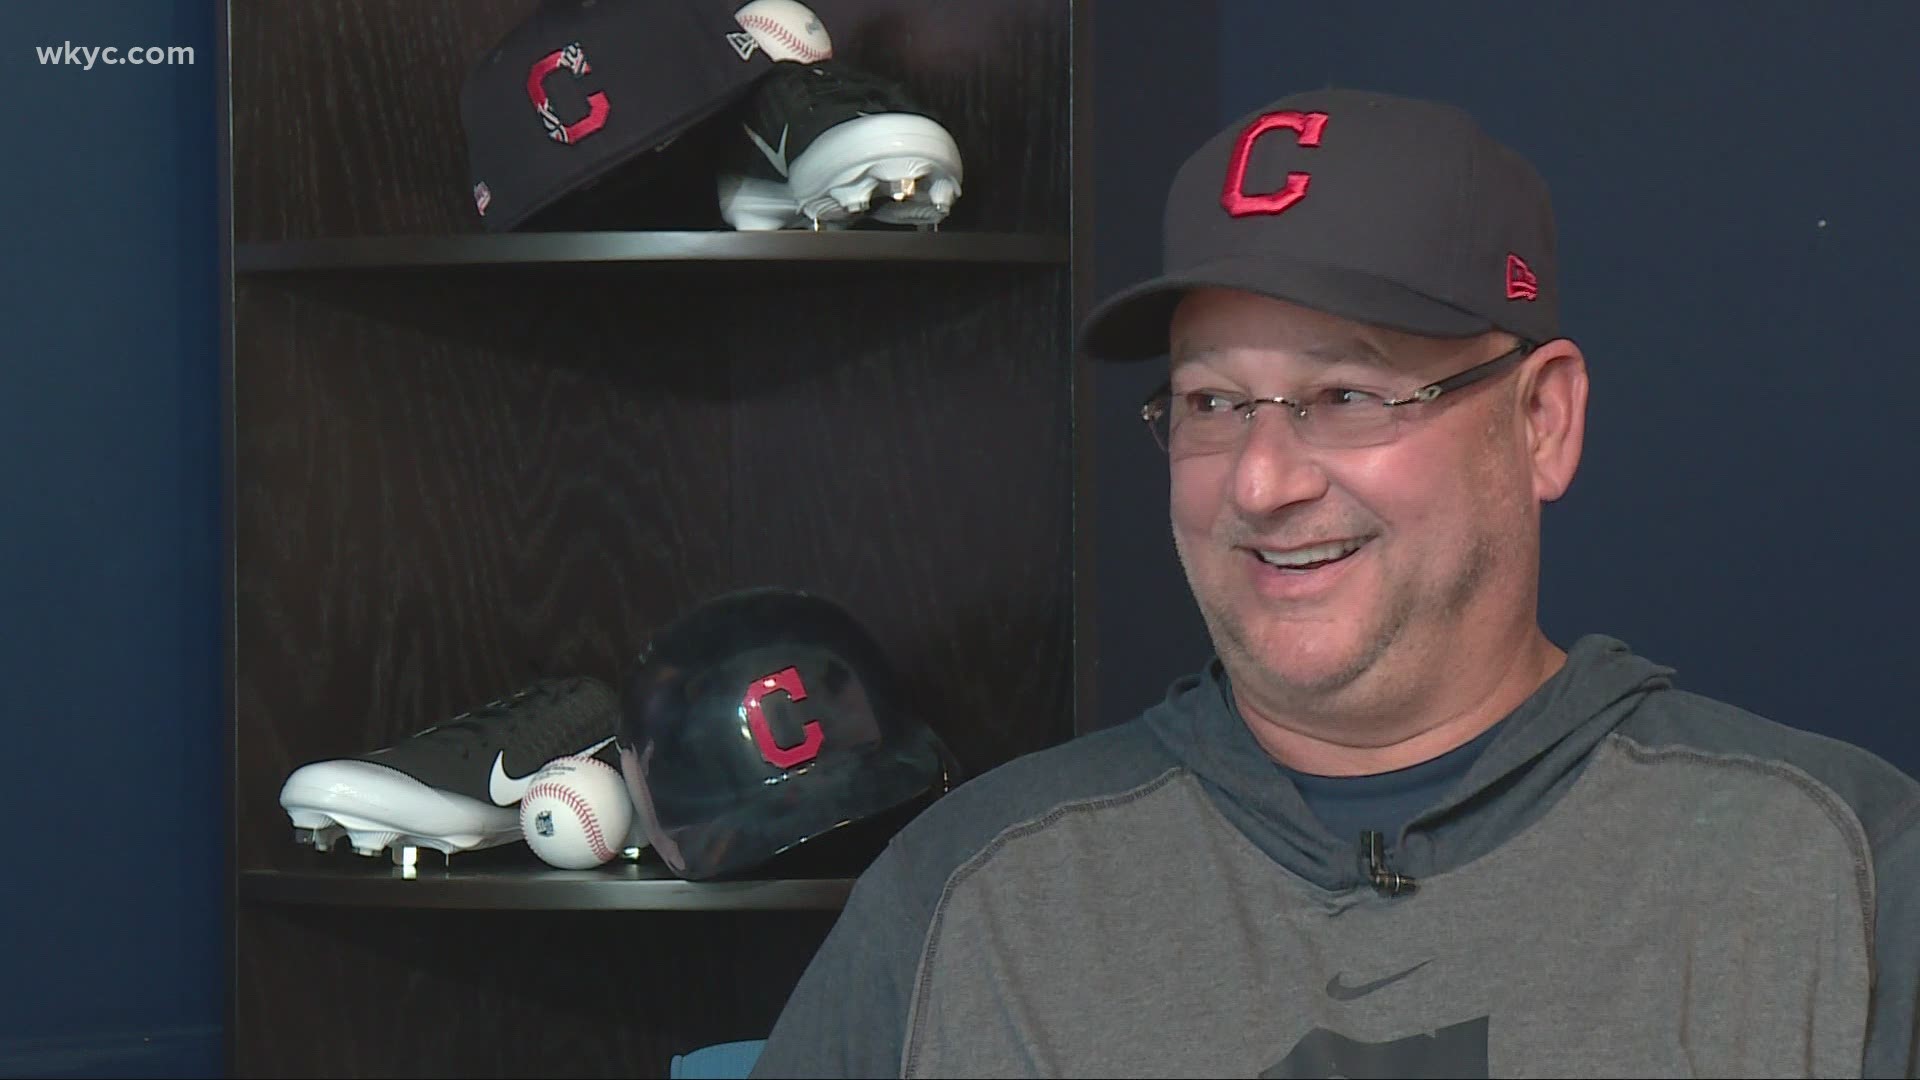 Sept. 28, 2020: We go 'Beyond the Dugout' for an in-depth conversation with Terry Francona. He reveals his go-to song, go-to snack and lots more.